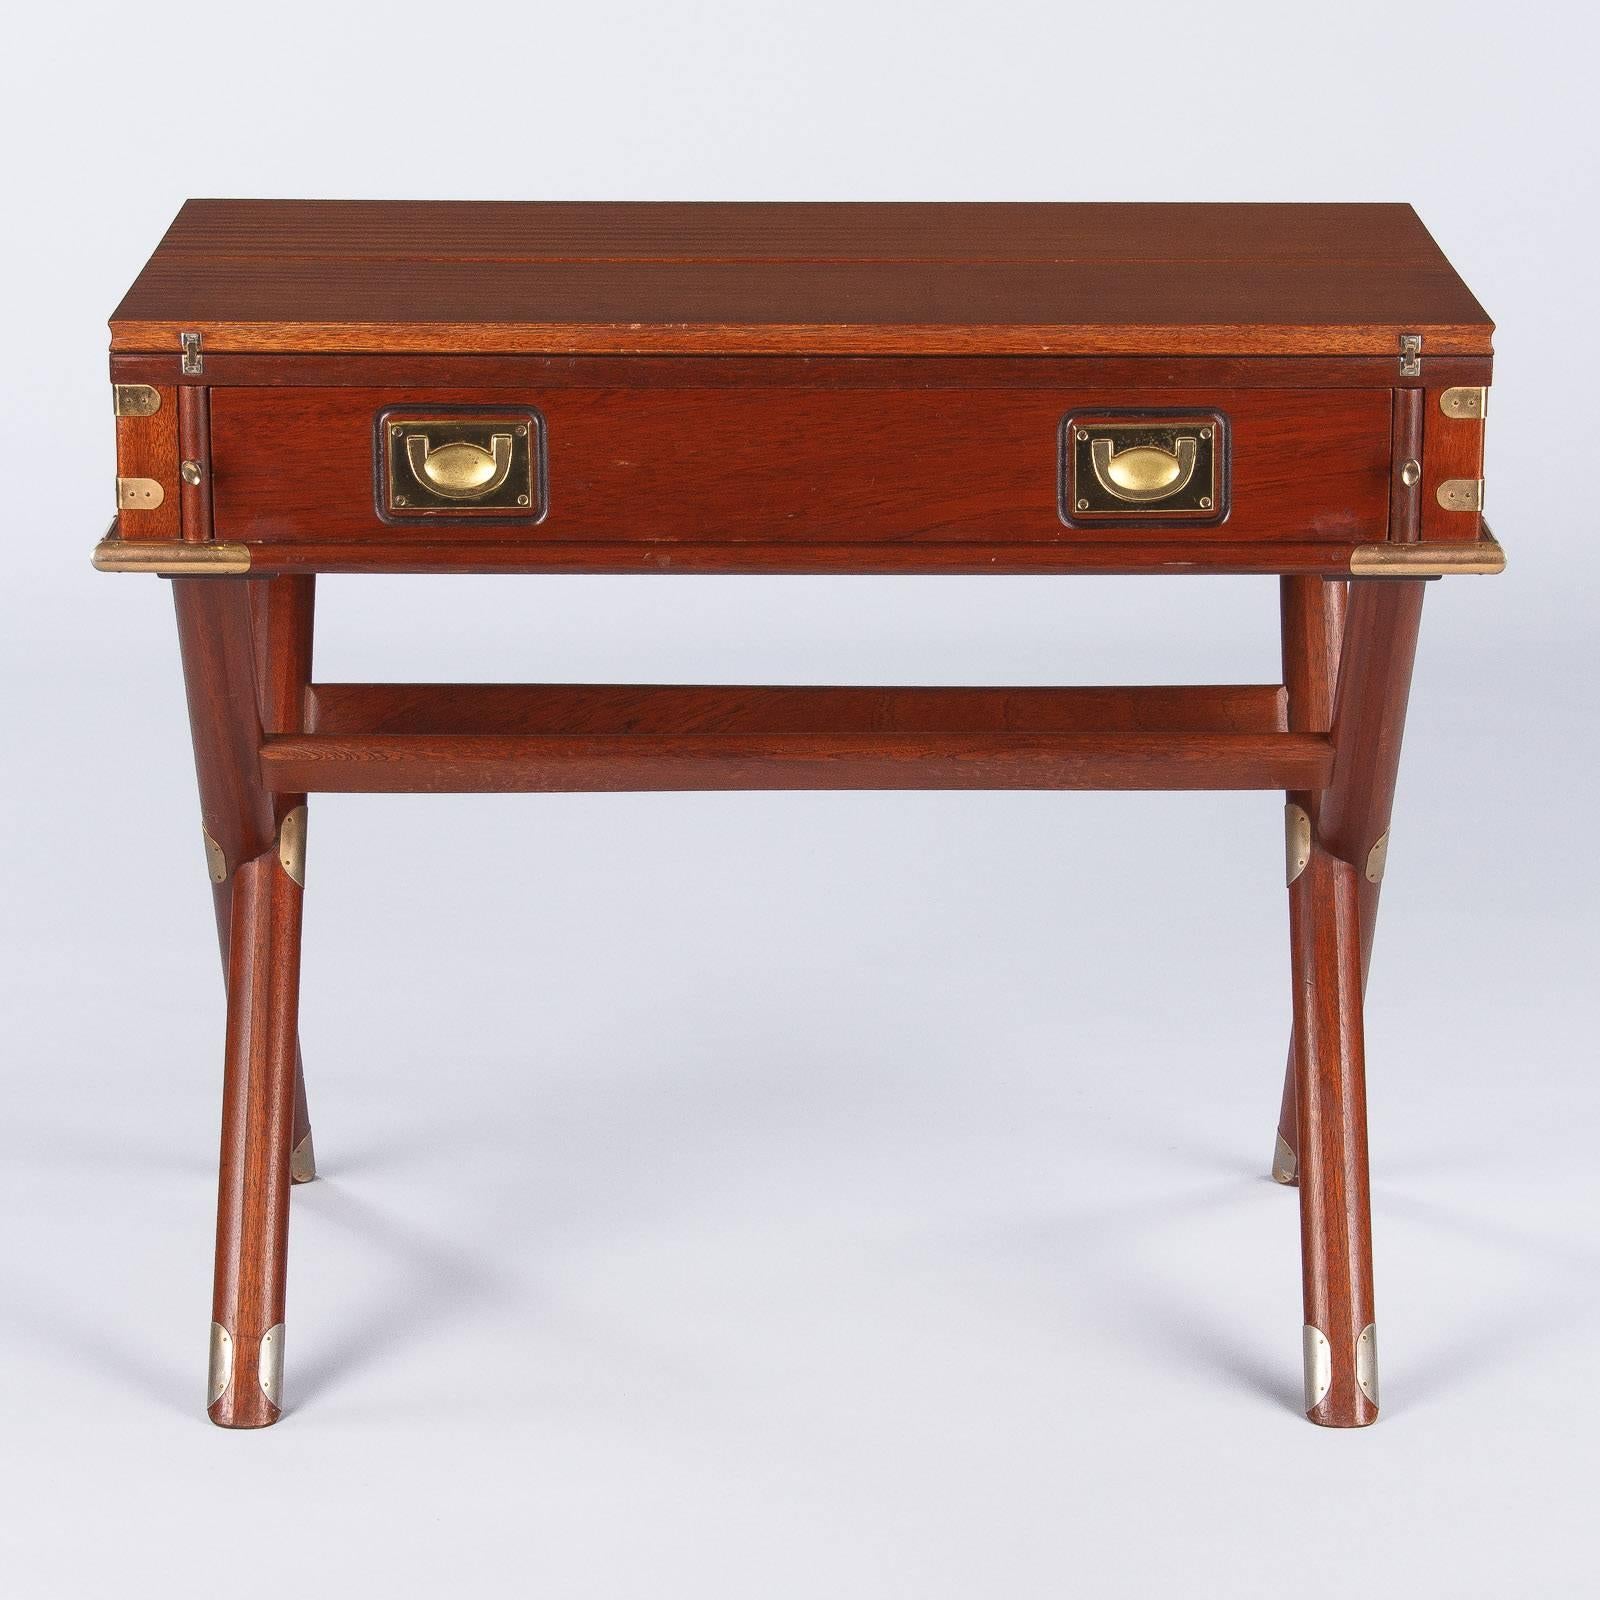 A very interesting and unusual Campaign Style English desk, that can also be used as a console table, made of ribbon mahogany. The desk, circa 1960s, has a nautical style and features two drop leaves that when opened make the piece 37.25